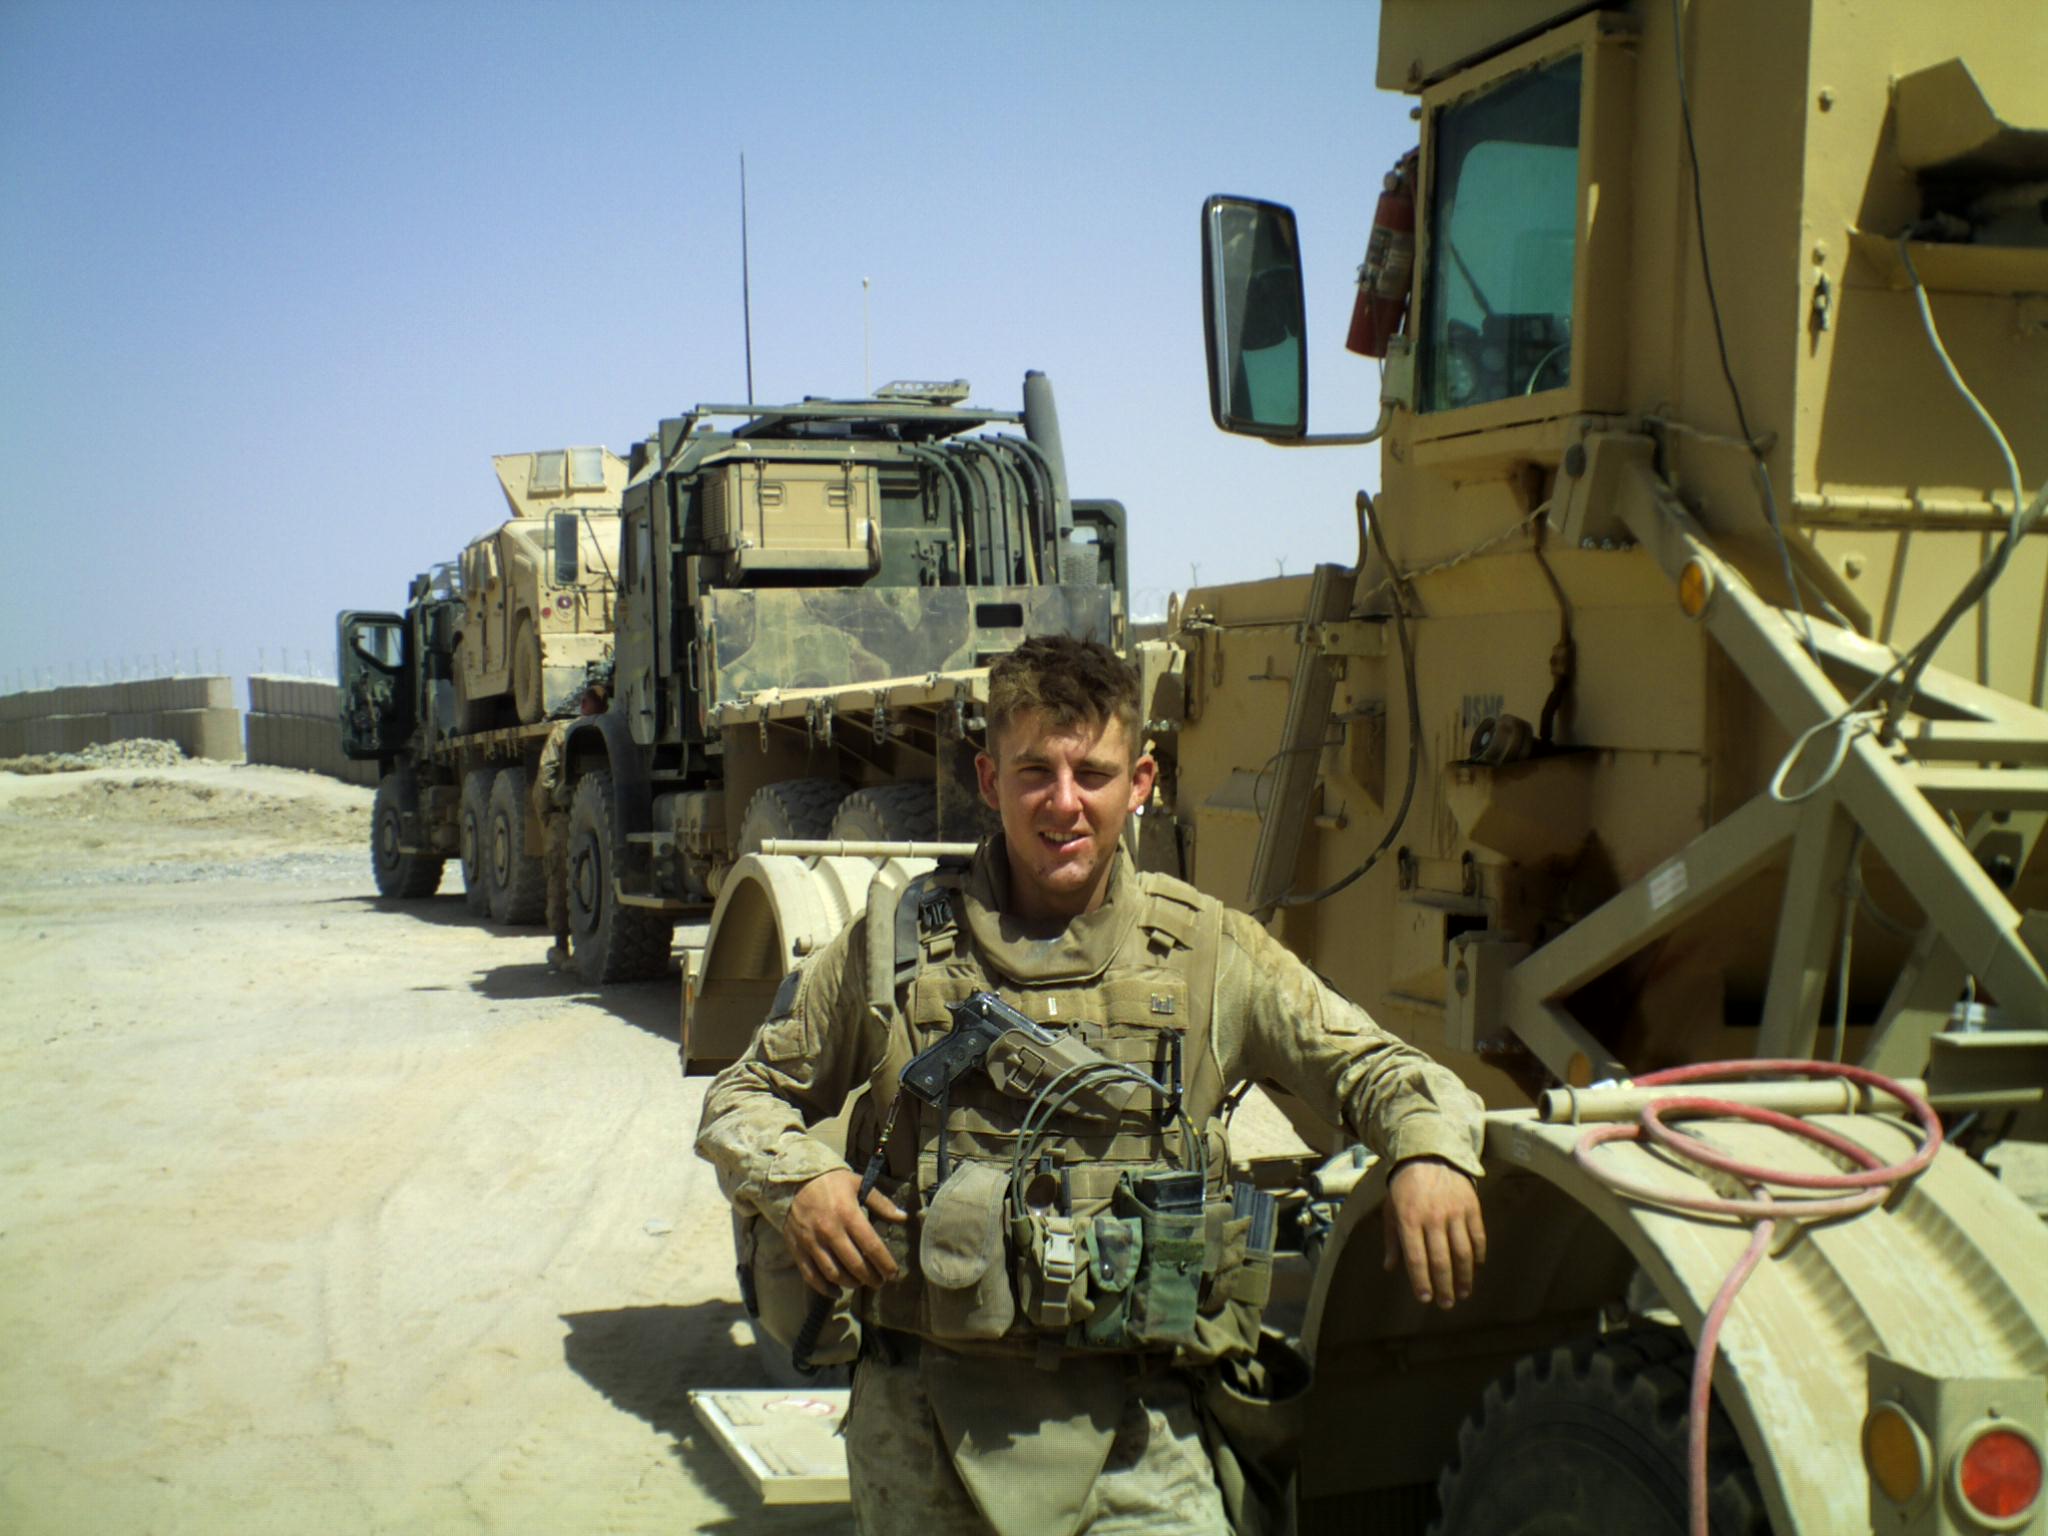 Marine Corps Captain Patrick Caffrey in Afghanistan while on duty in 2008.